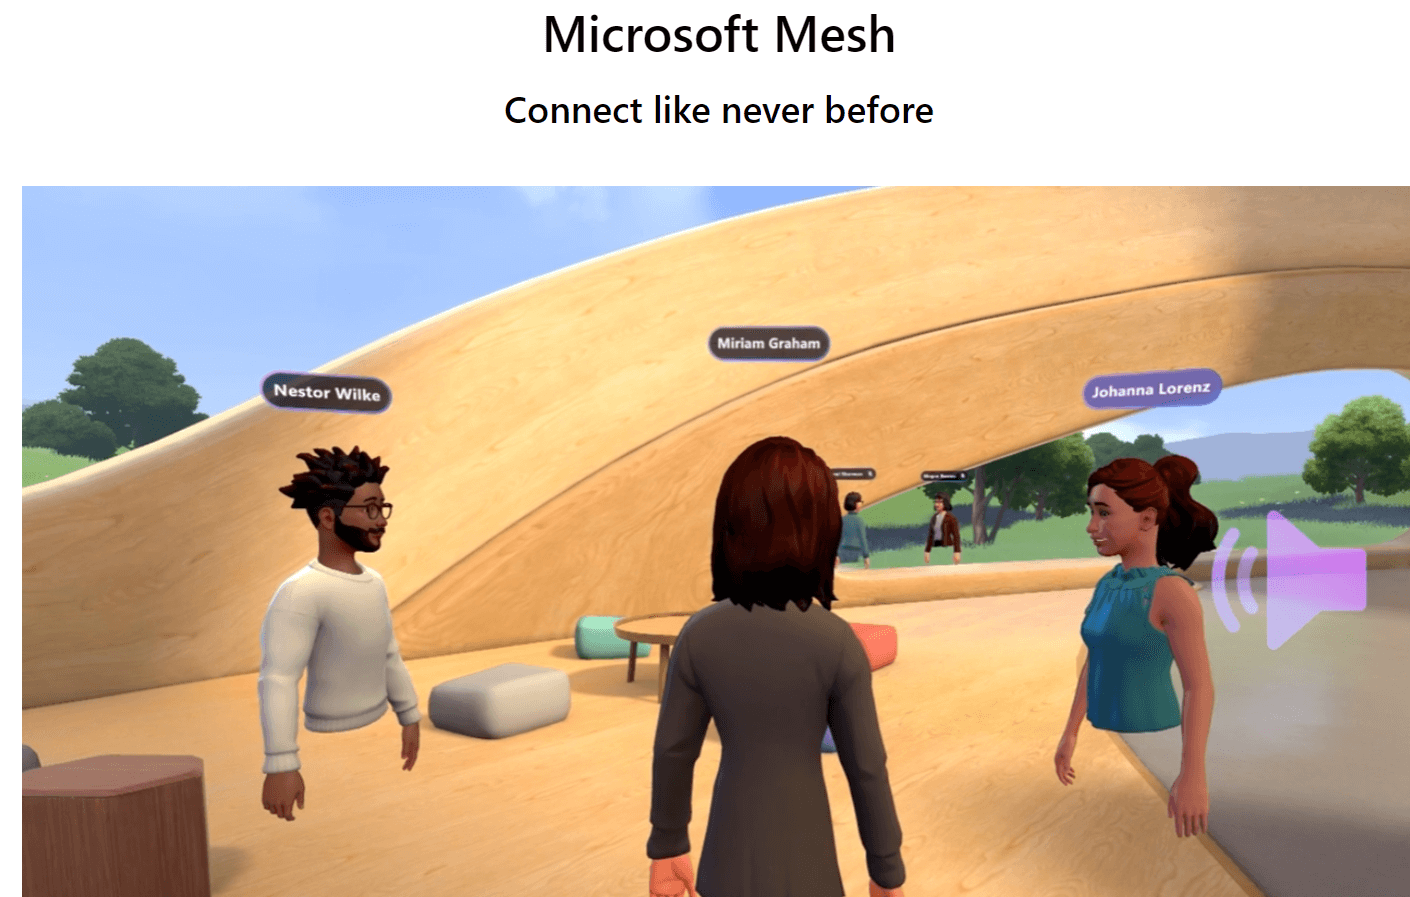 An example of what Mesh avatars look like in Microsoft Teams